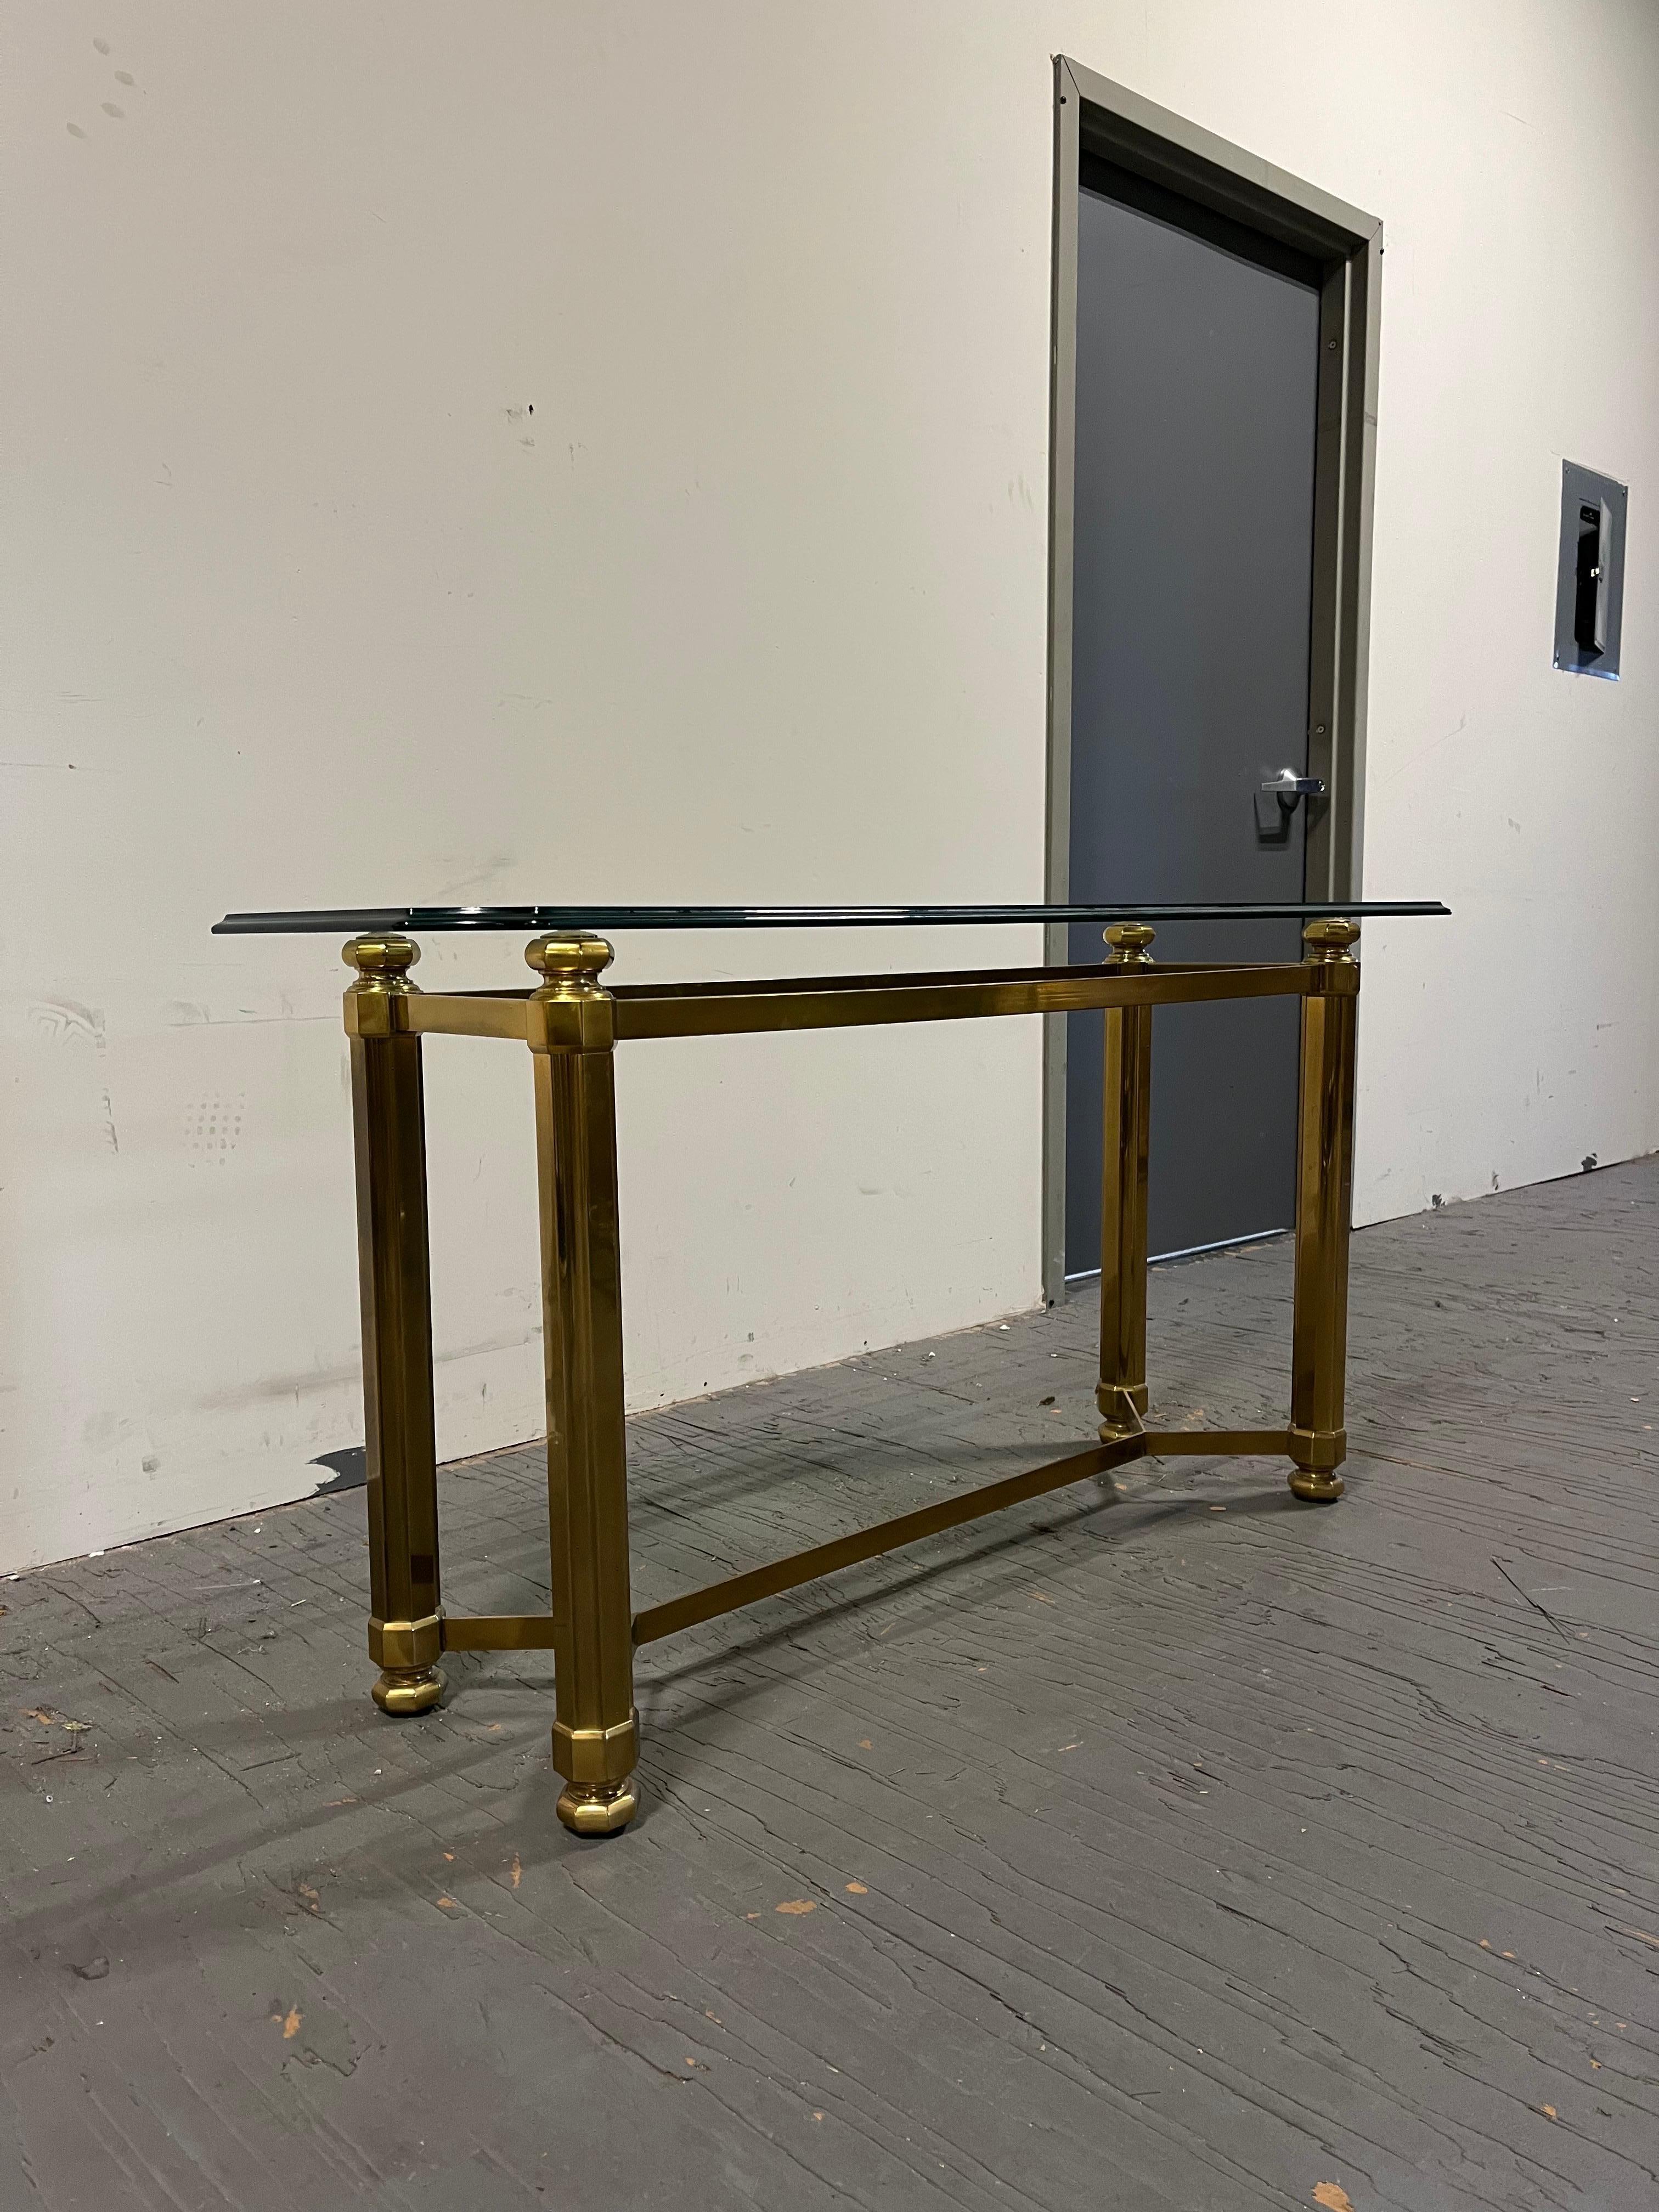 Beautiful classic brass console table with glass top. Regal columnar legs with substance and heft. Octagonal design with heavy final presence. OG beveld edge glass. 
Curbside to NYC/PHILLY $35O